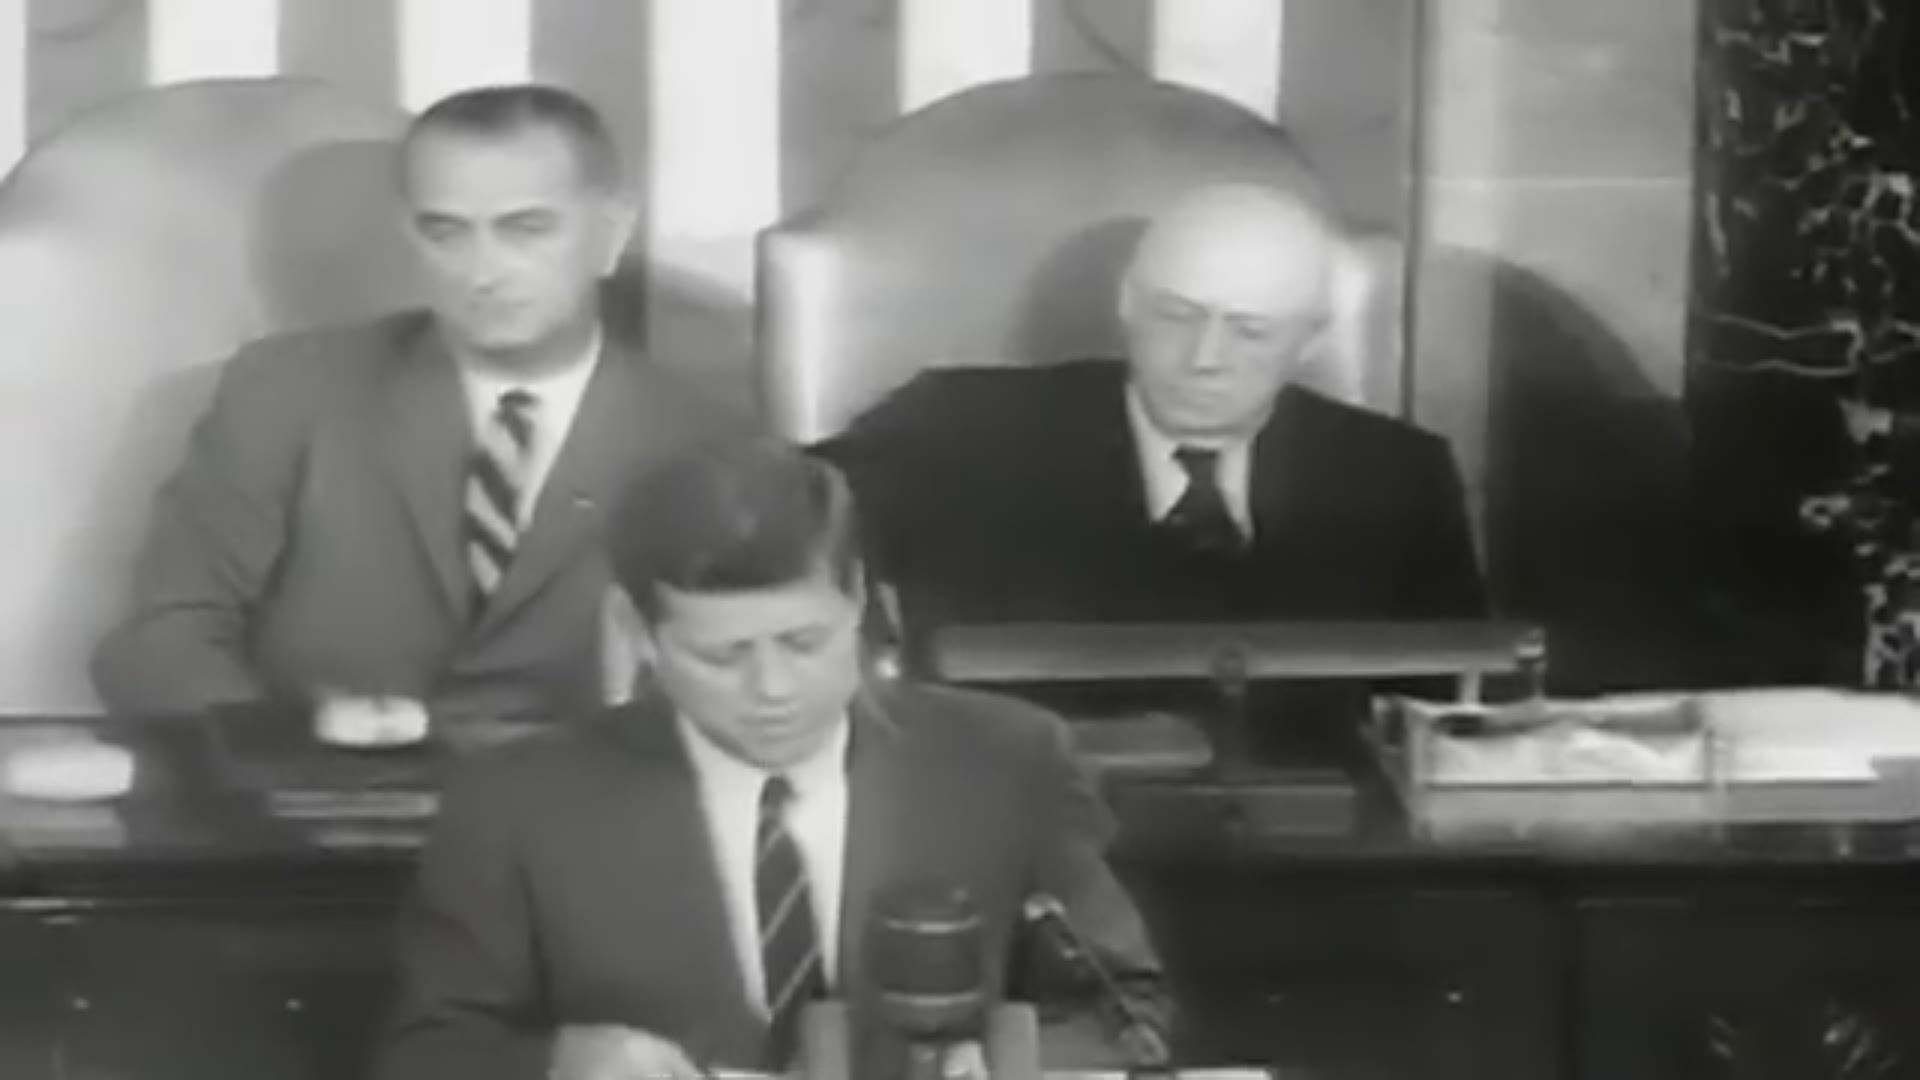 On May 25, 1961, President John F. Kennedy called on Congress to provide funding to land a man on the moon by the end of the decade.